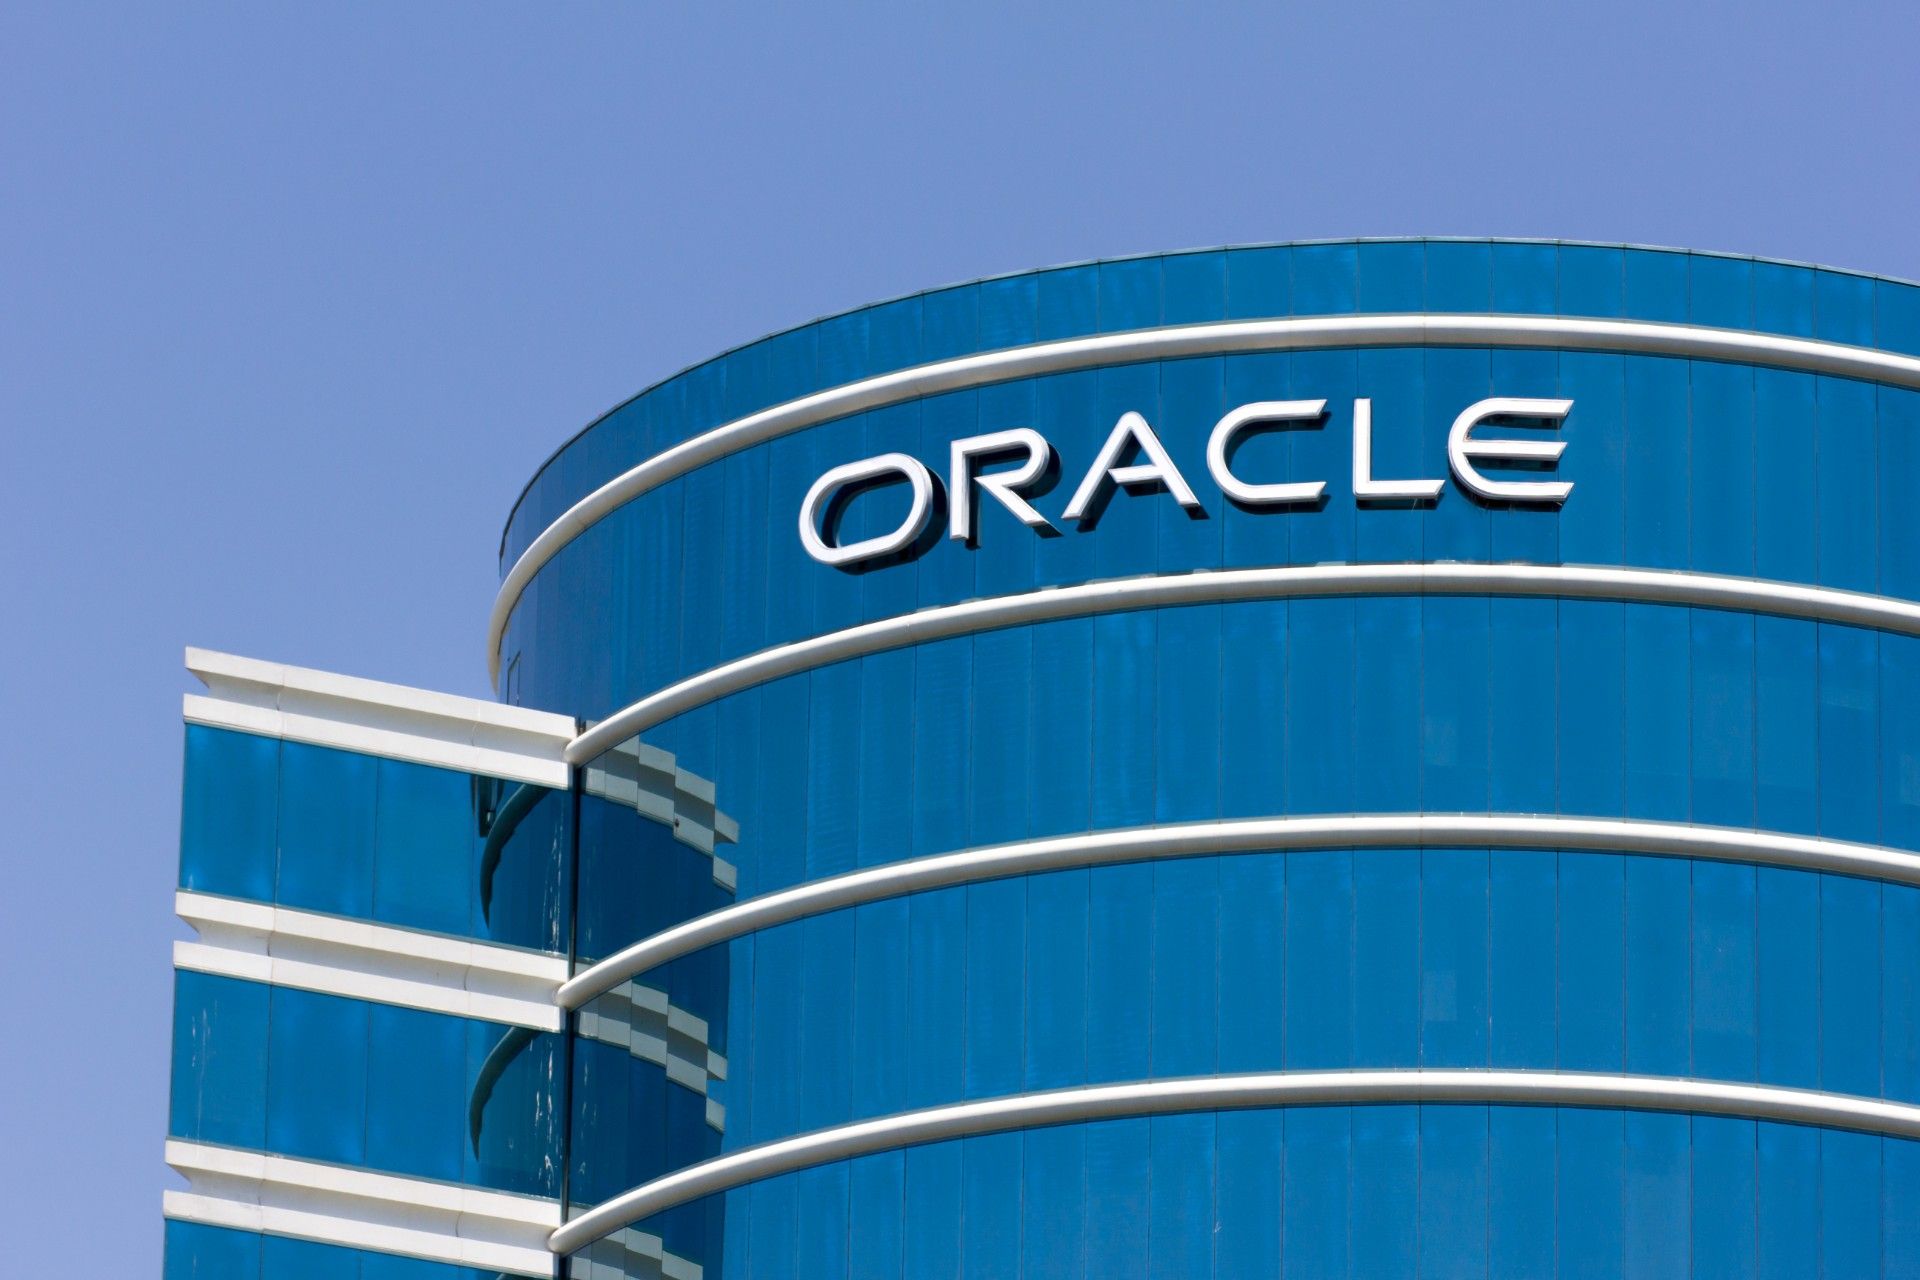 Oracle company sign on glass building